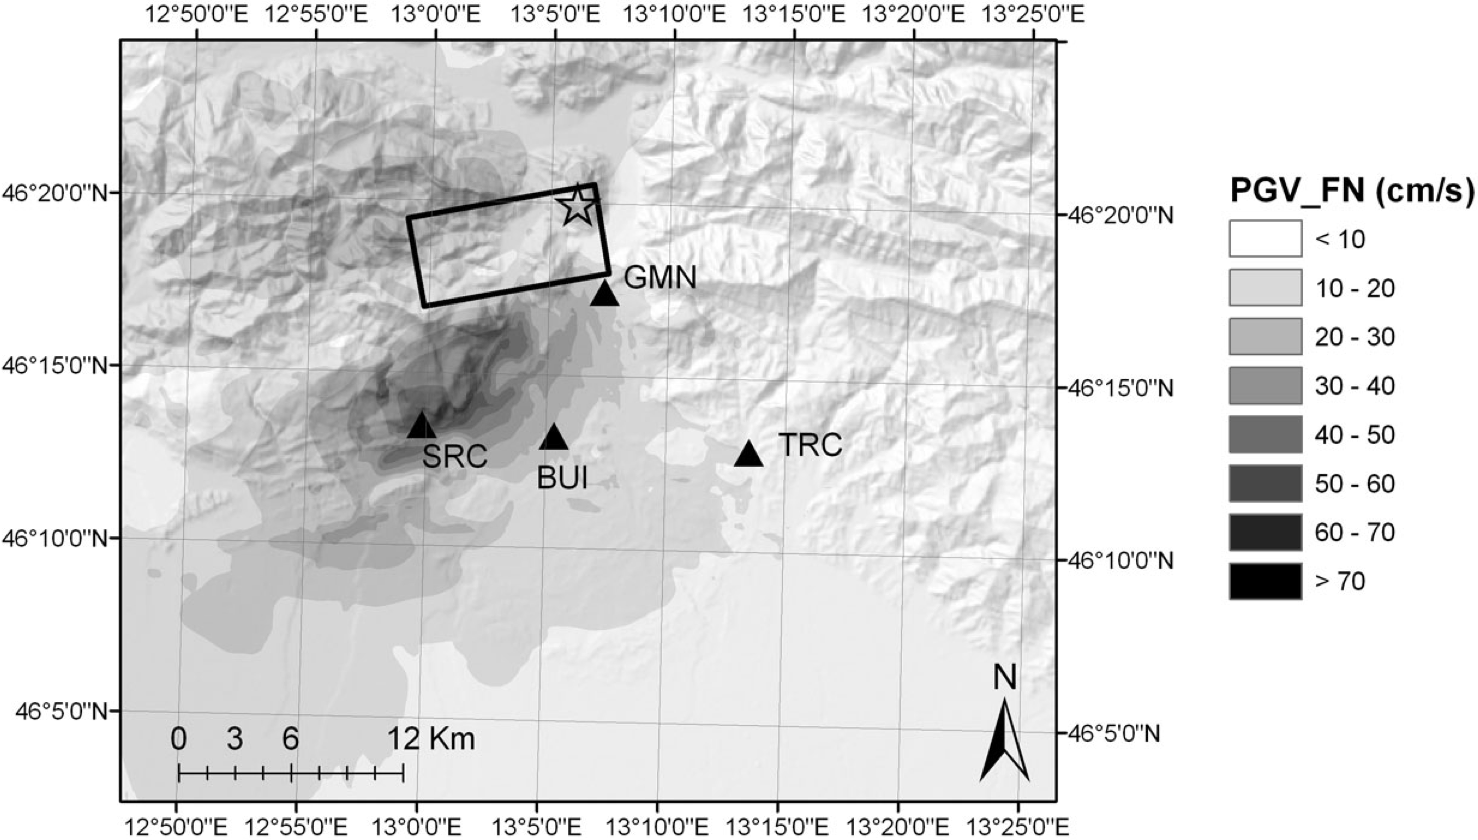 The same area as Figure 1. Fault-normal Peak Ground Velocities (PGV_FN, calculated); the surface projection of the causative fault and nucleation (star) adopted to model the Mw 6.0 event of 15 September, 1976, 09:21; the existing accelerometric stations (here, Buia is BUI and San Rocco is SRC). From Smerzini et al., 2010. This figure explains why in this earthquake San Rocco (on sound rock) experienced higher amplitudes than on alluvium in Buia; it was a near-field source effect.